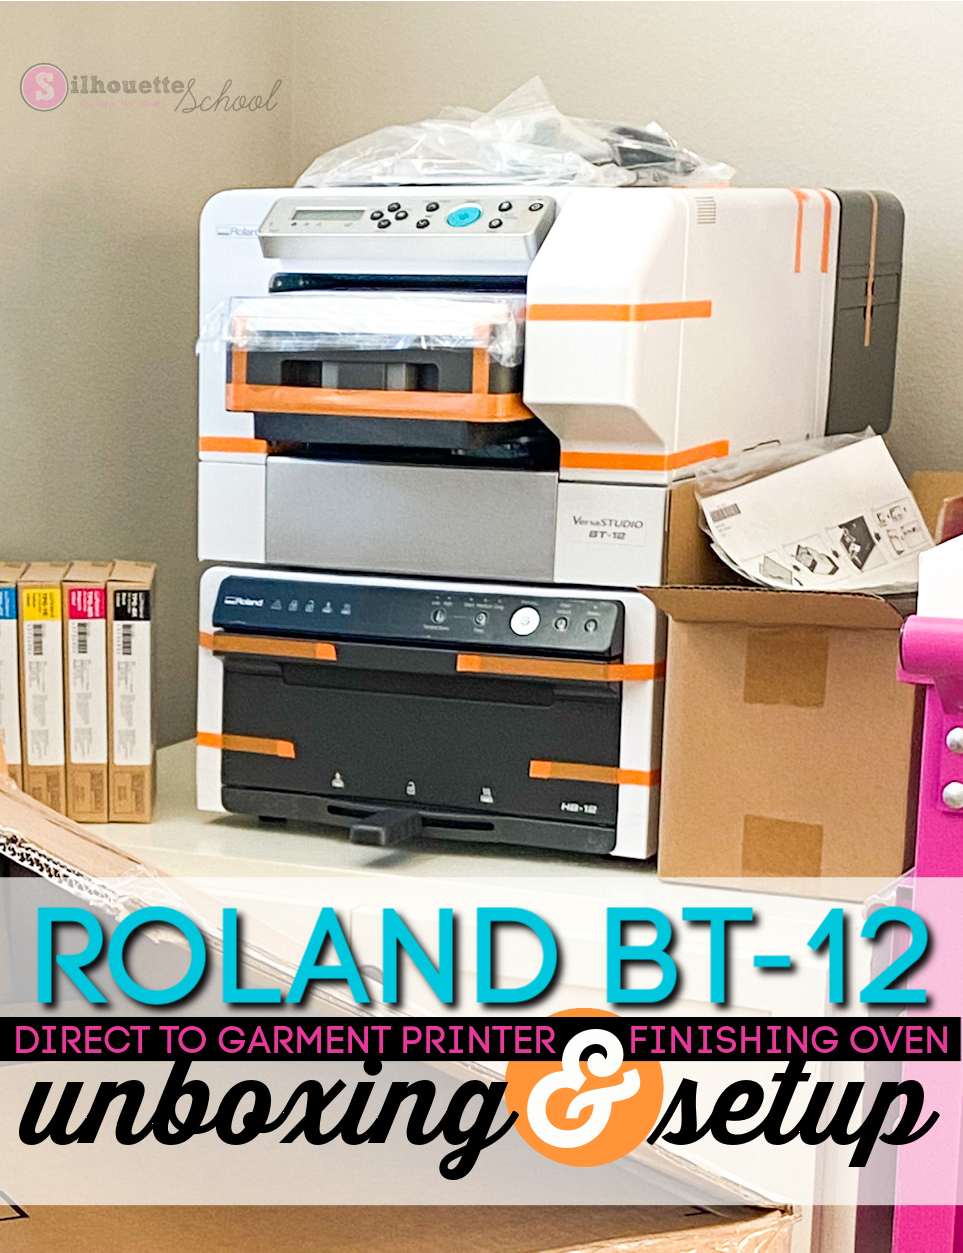 Roland BT-12 Direct to Garment Printer Unboxing and Setup - Silhouette  School